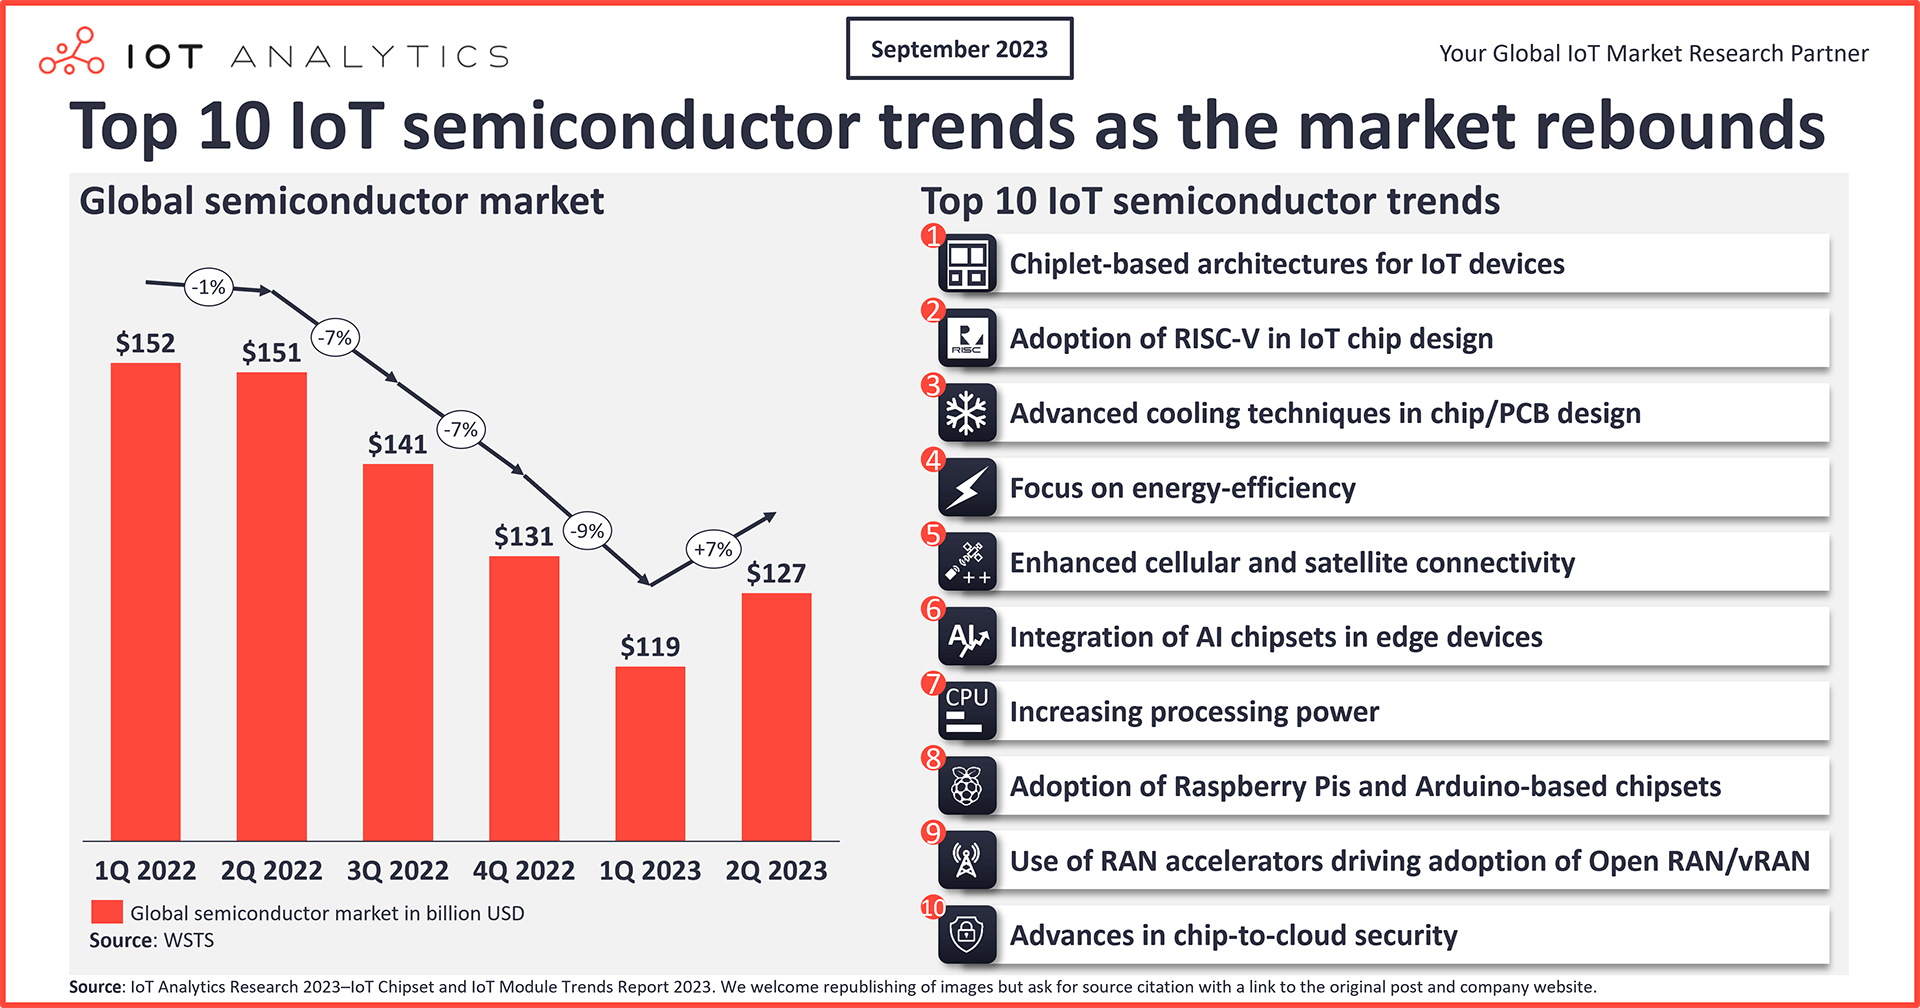 graphic: Top 10 IoT semiconductor trends as the market rebounds